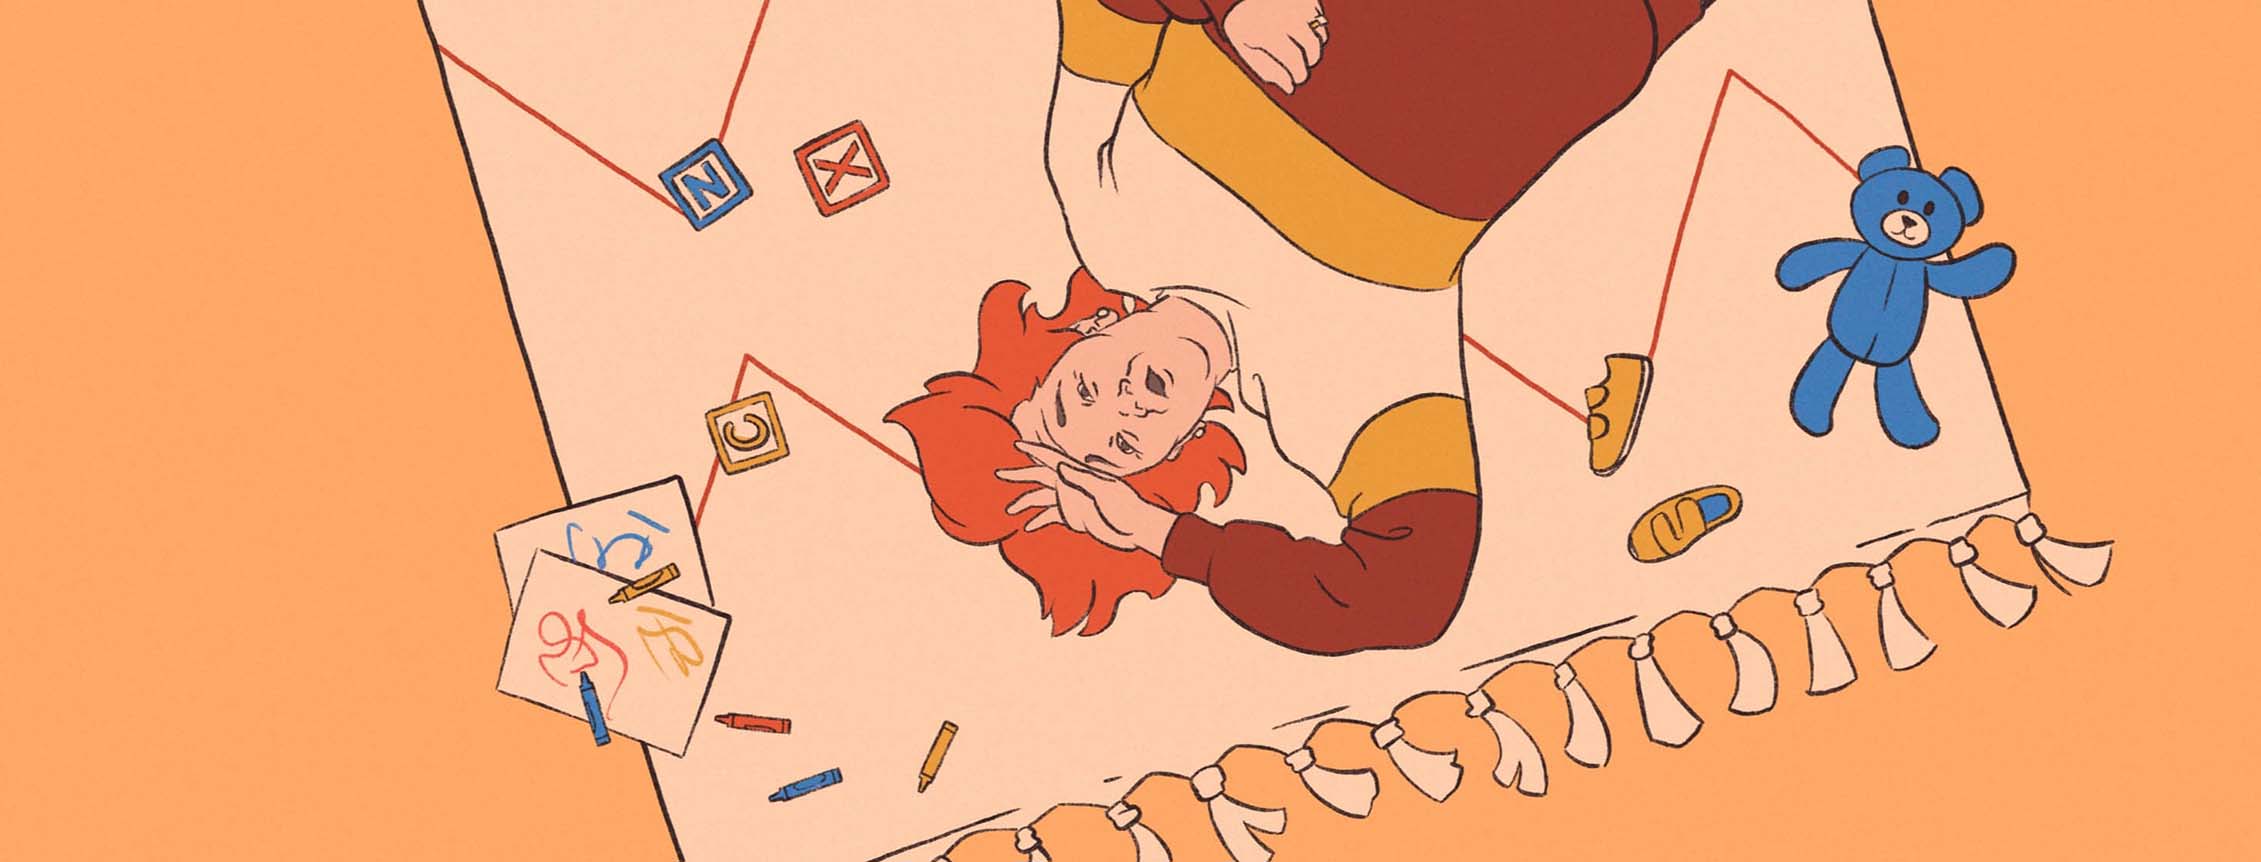 An older woman lays exhausted on a patterned rug surrounded by children's toys